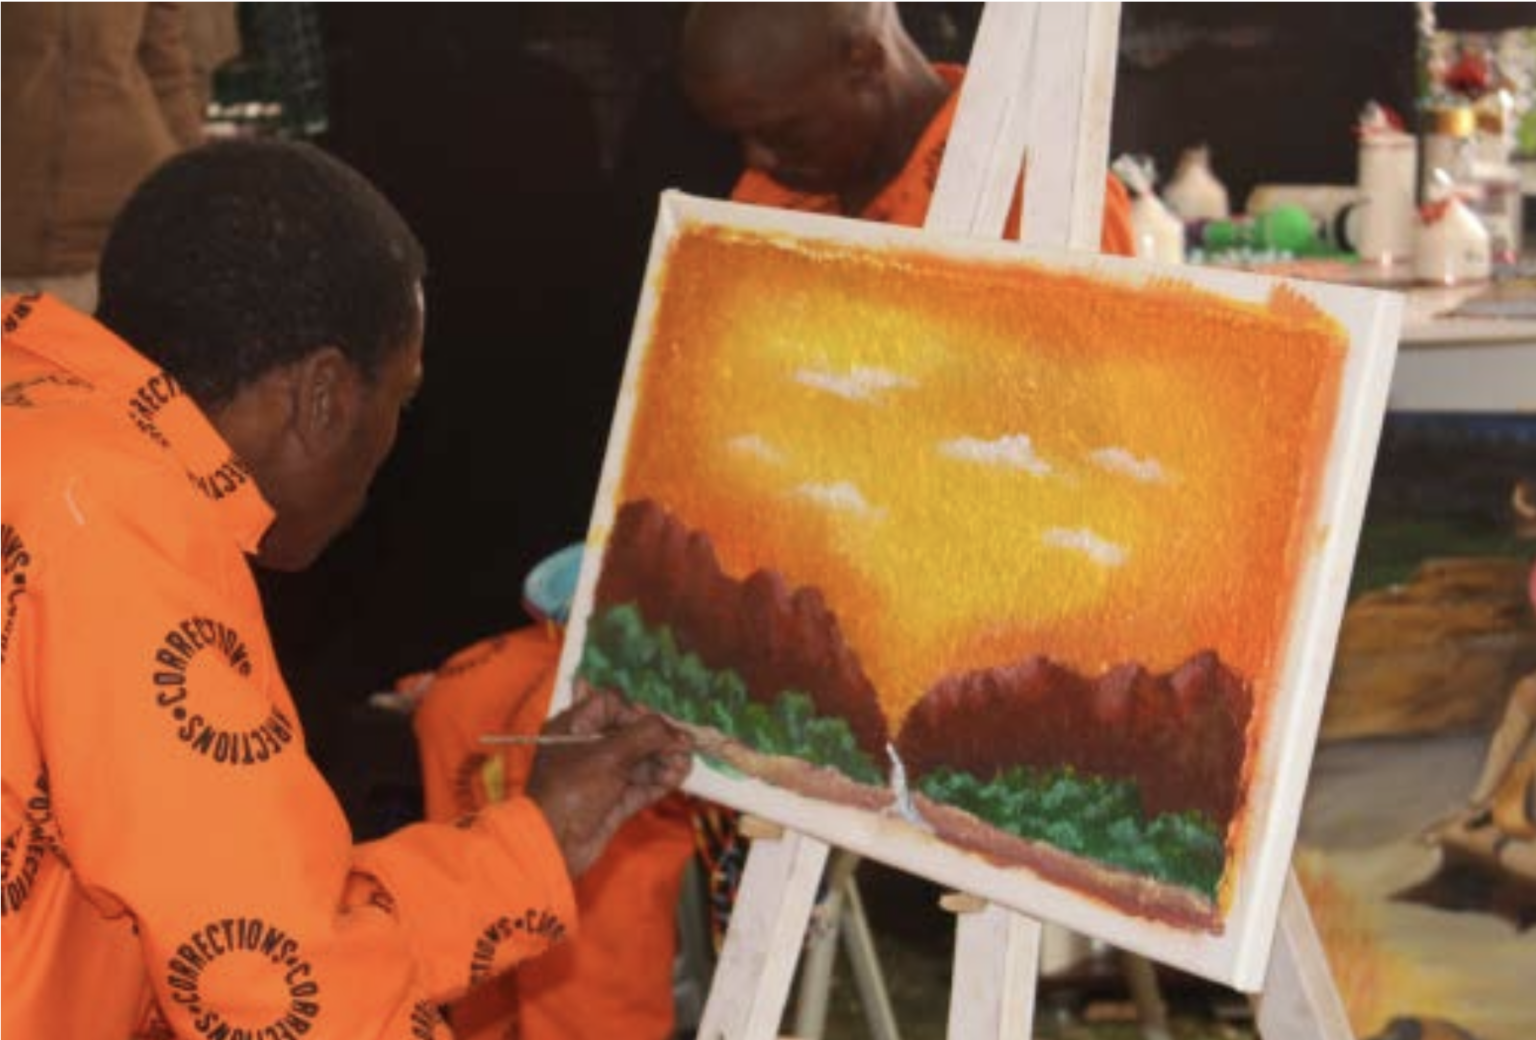 Eric Xakawe making a painting in front of an audience. Photographed by Ovayo Milisa Novukela